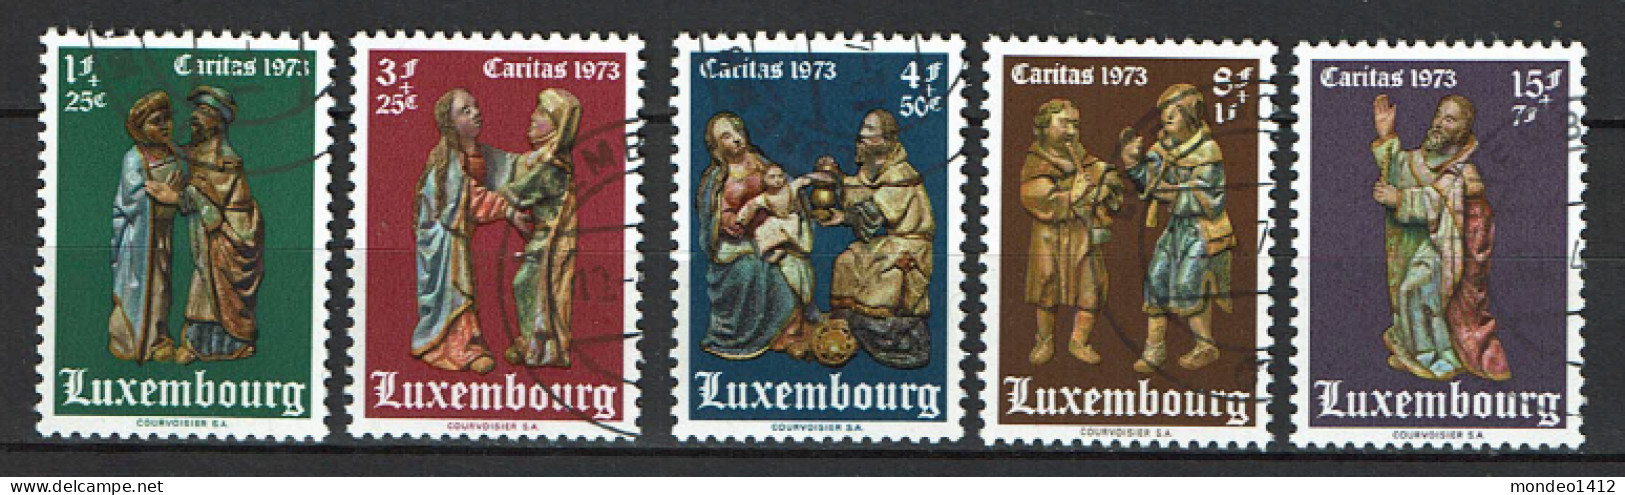 Luxembourg 1973 - YT 821/825 - Religious Statuettes - Charity Issue - Gebruikt